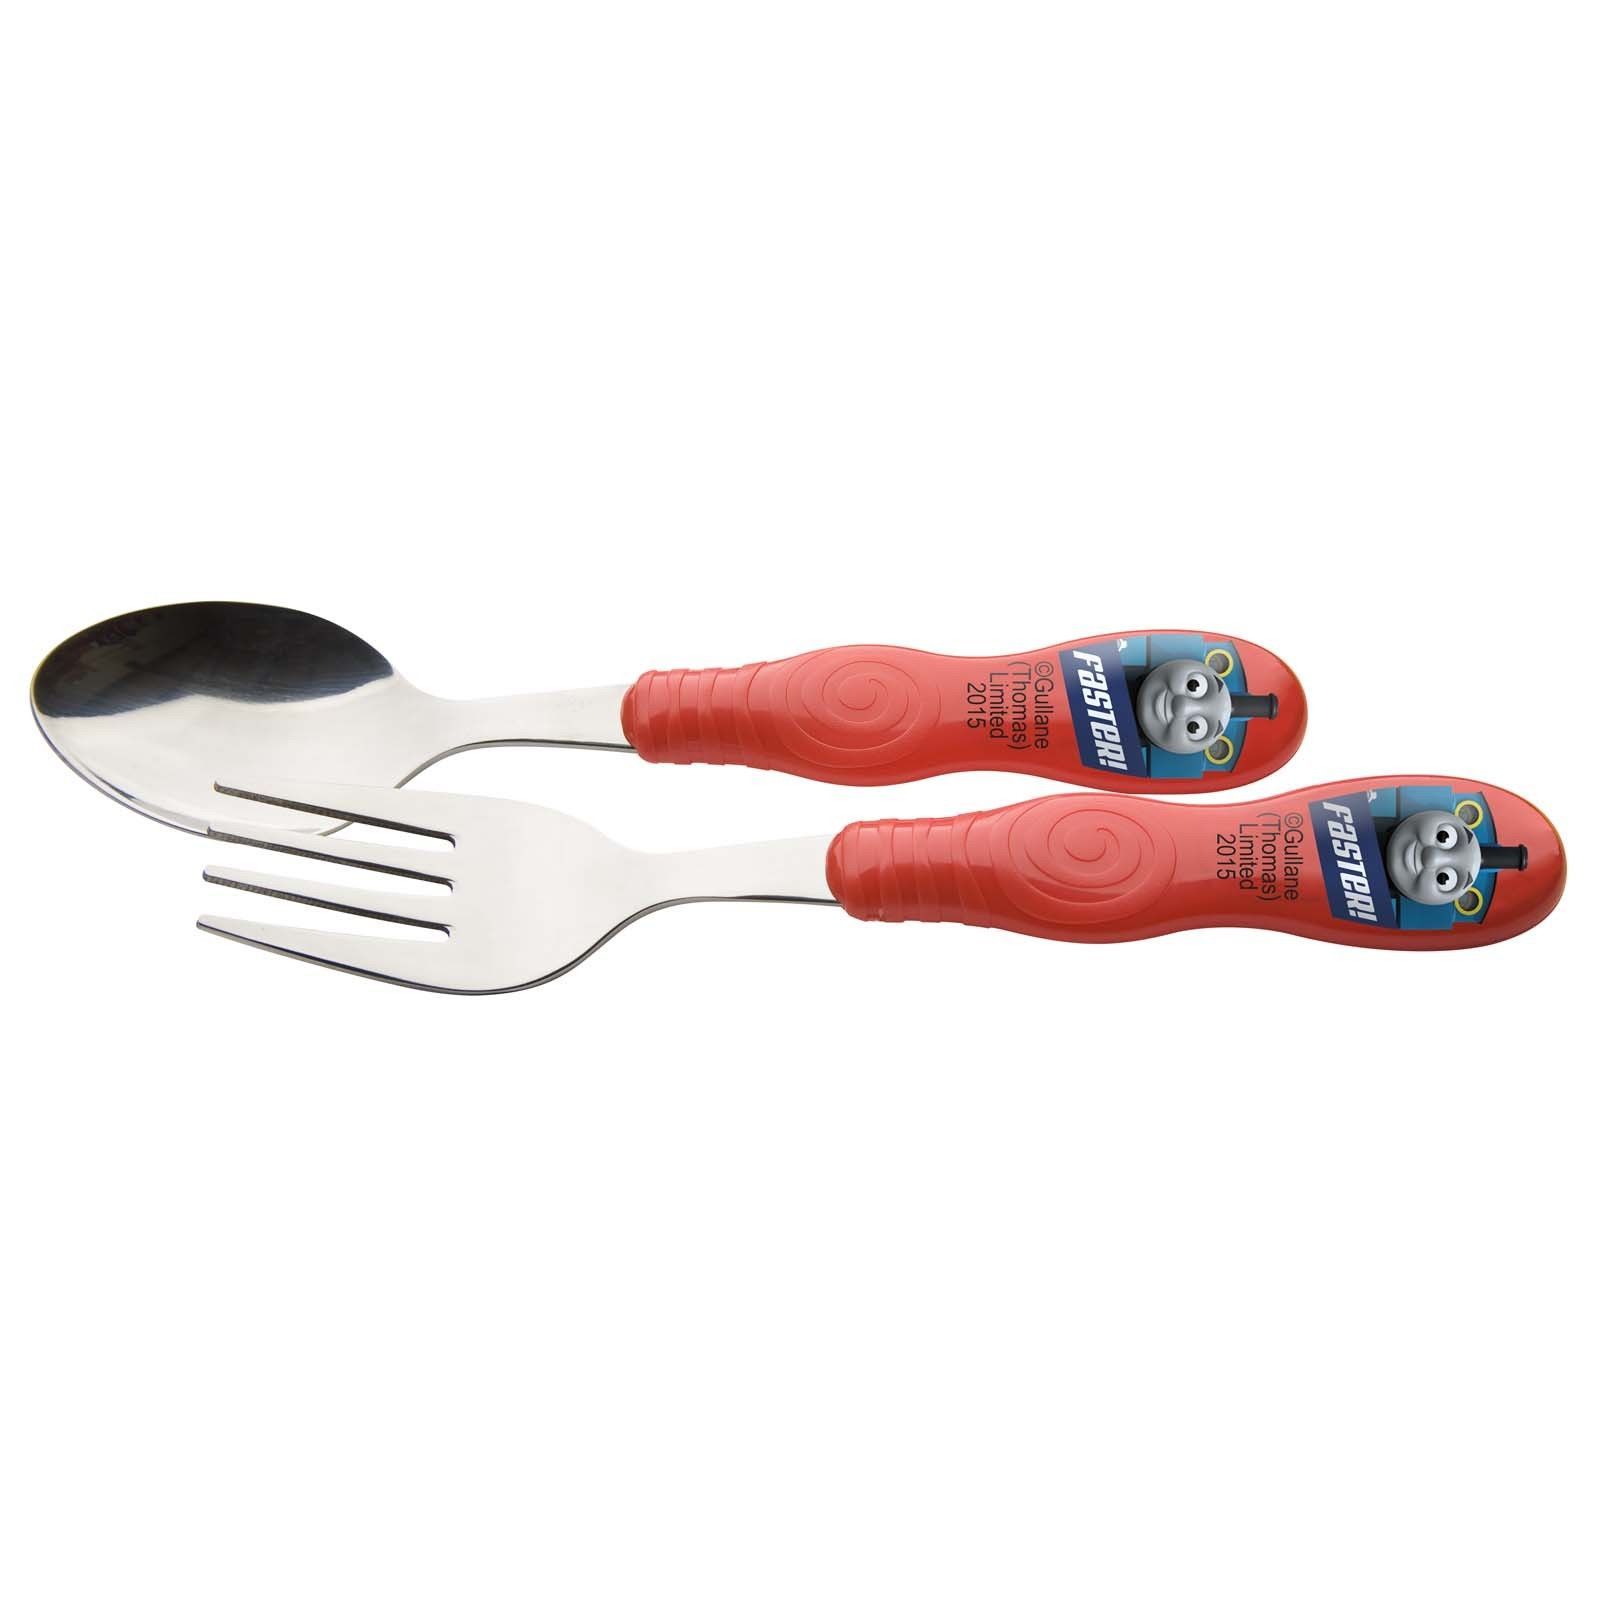 THOMAS THE TANK- SPOON AND FORK SET - $7.00